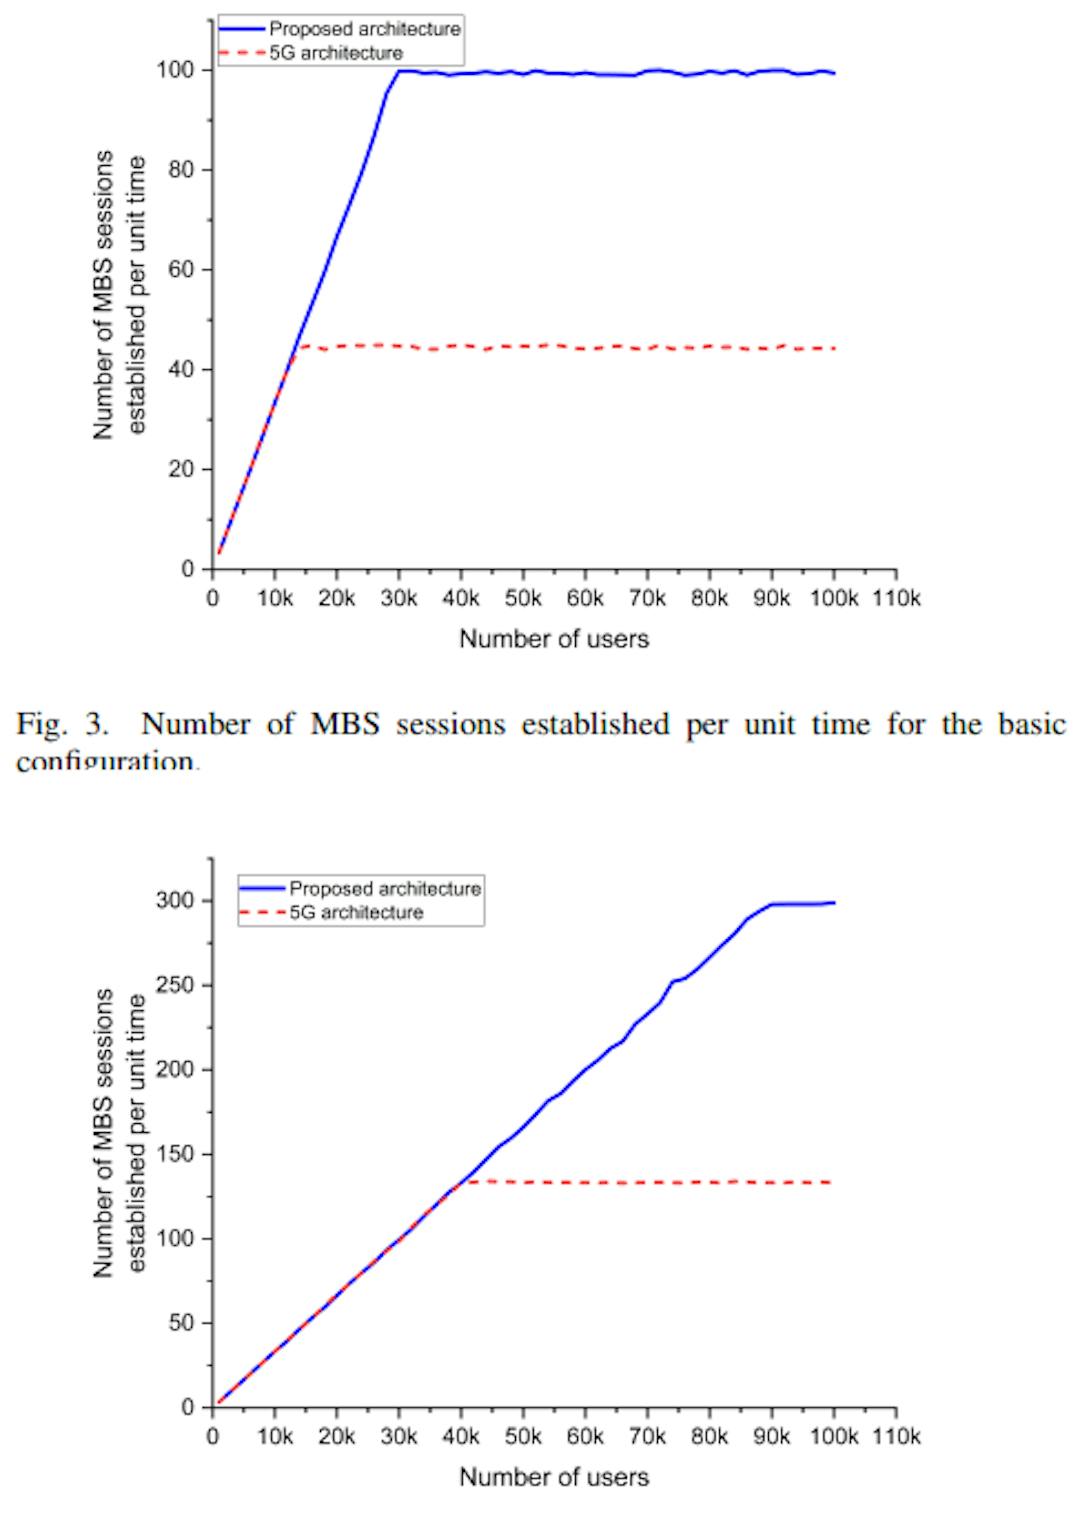 Fig. 4. Number of MBS sessions established per unit time for the scaled configuration.